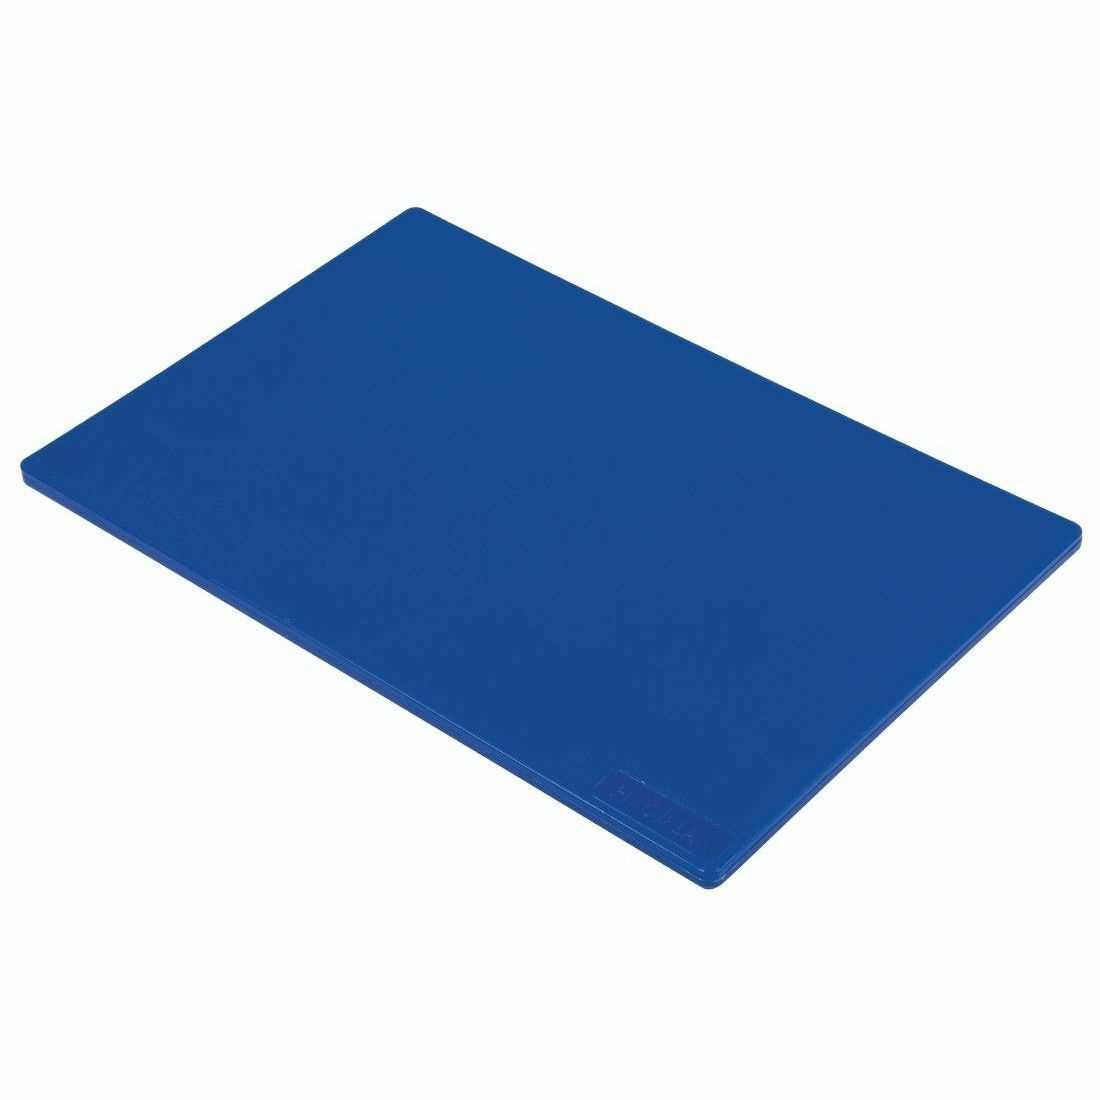 Blue Kitchen Chopping Board Commercial Cutting Board Colour Coded Hygiene Catering Food Cutting Set